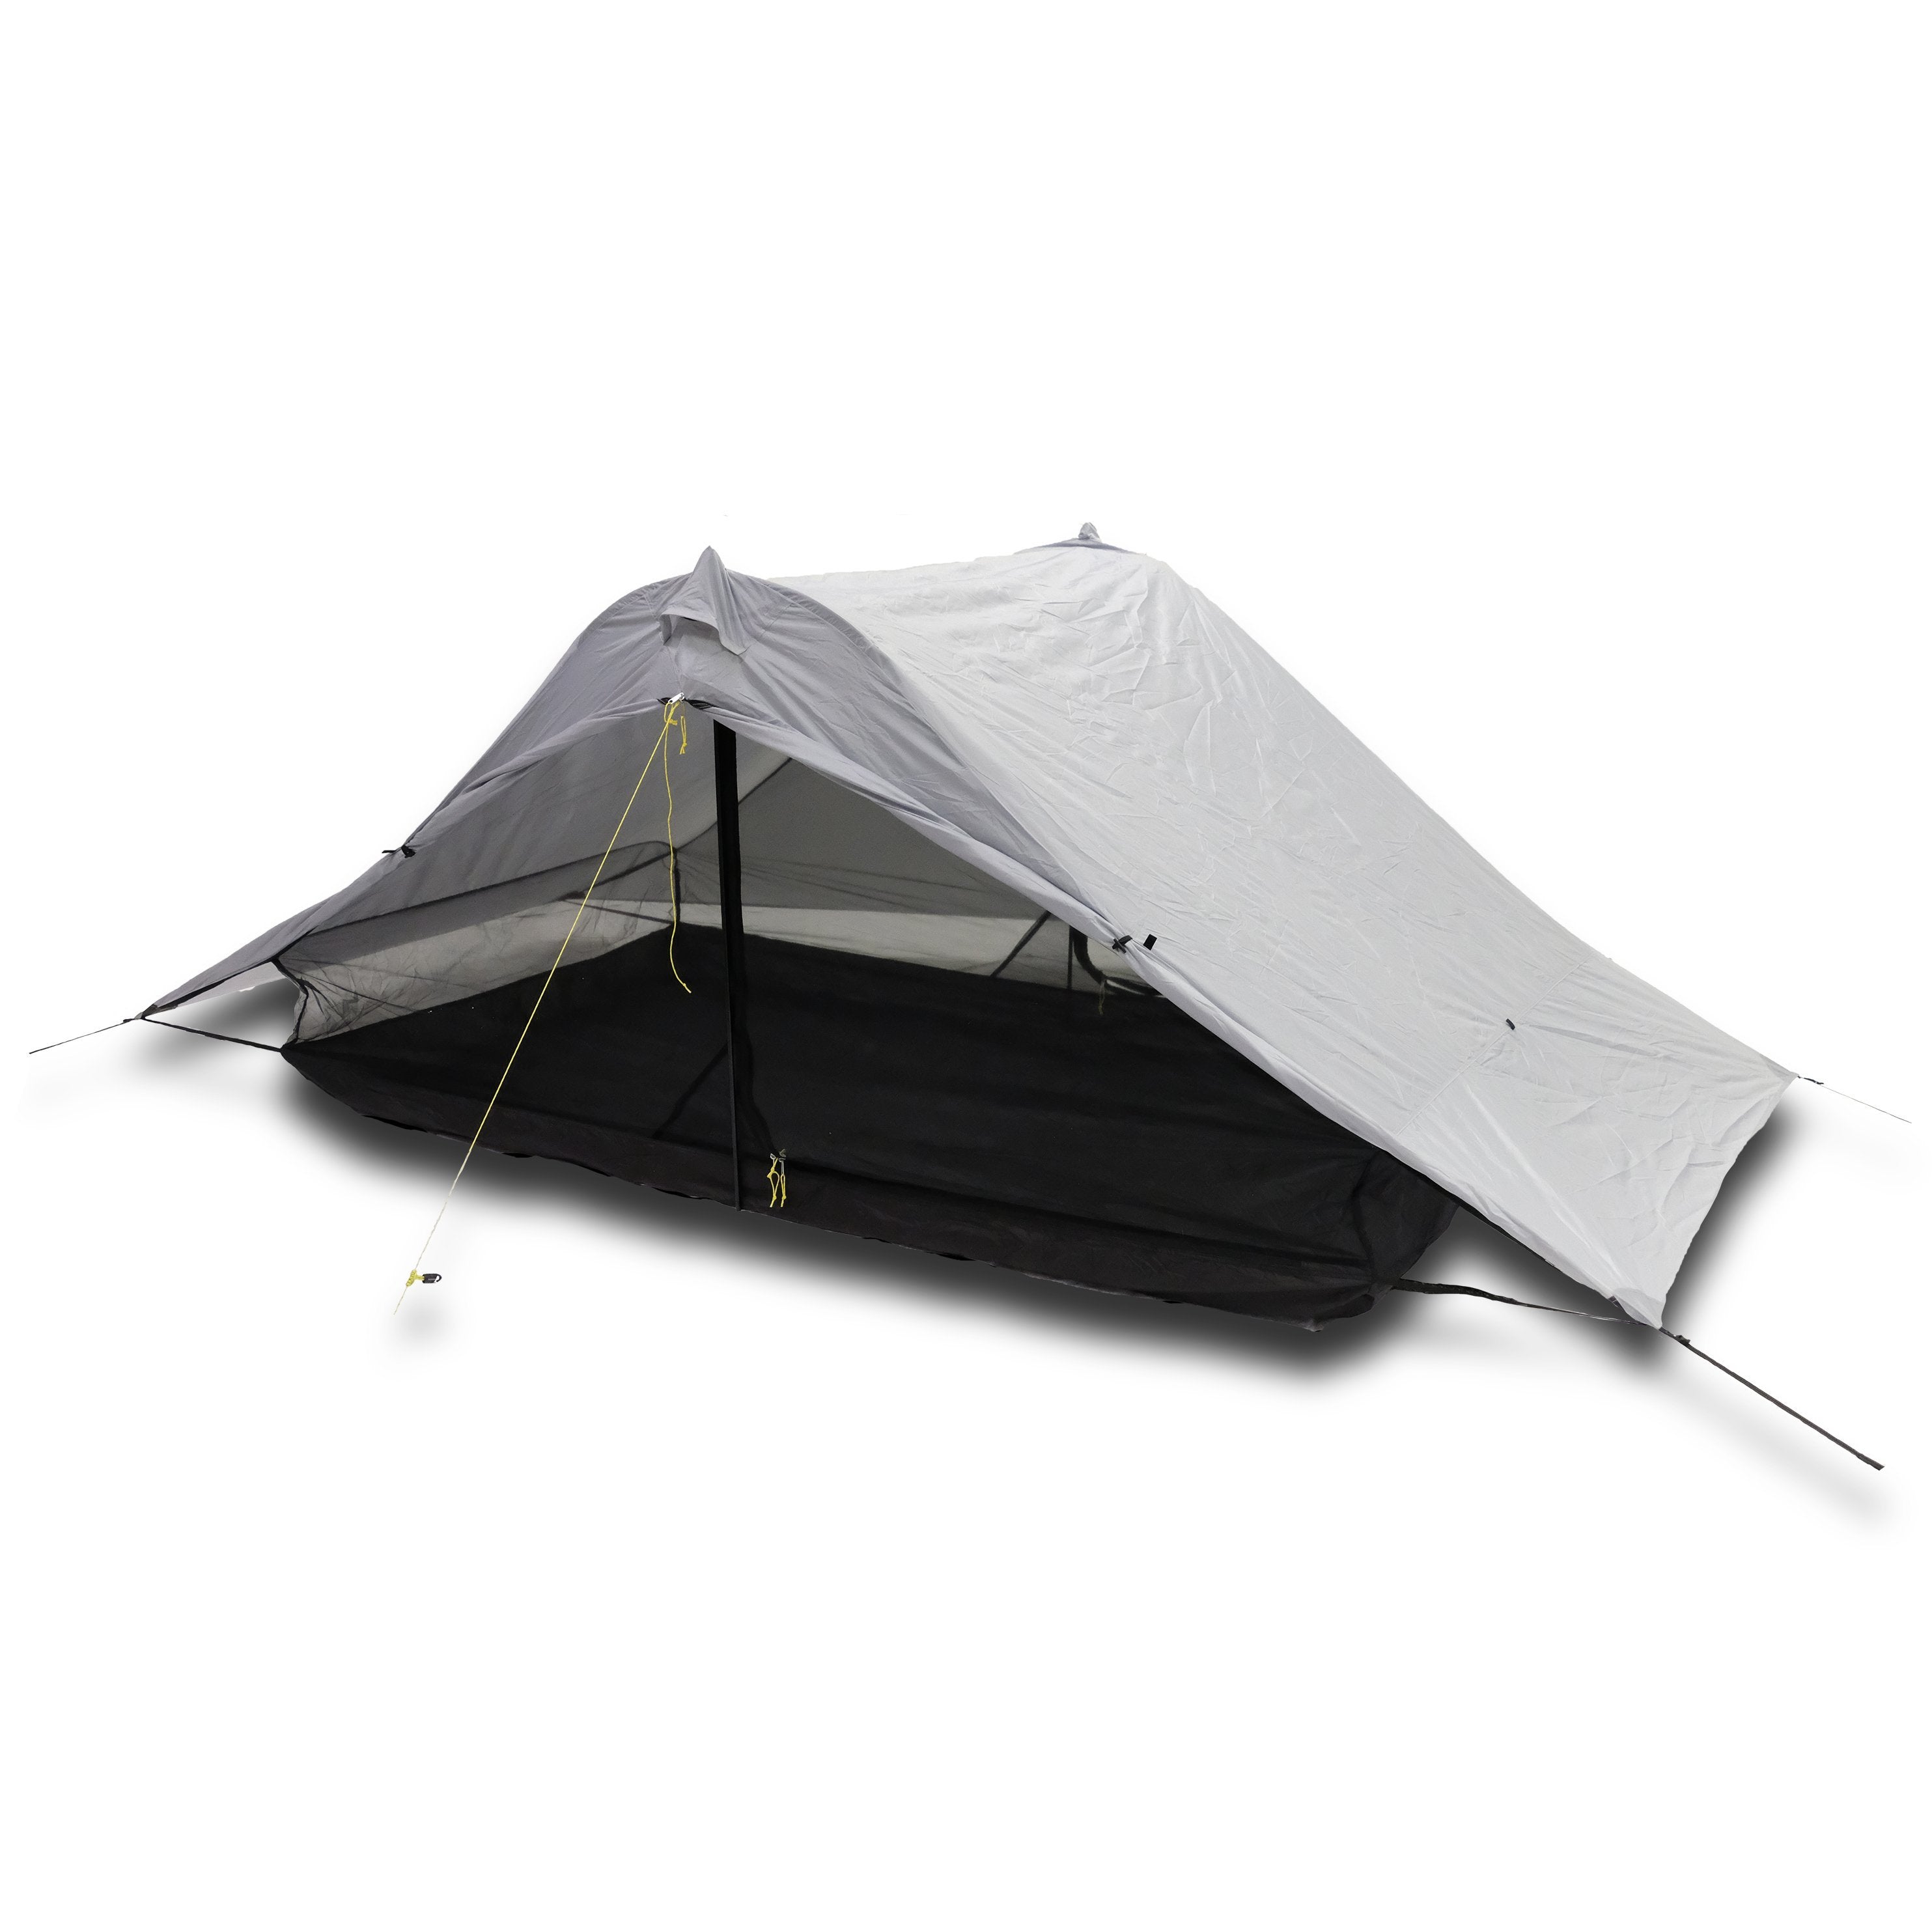 Lunar Duo Outfitter 2 Person Ultralight Tent with doors open front the side